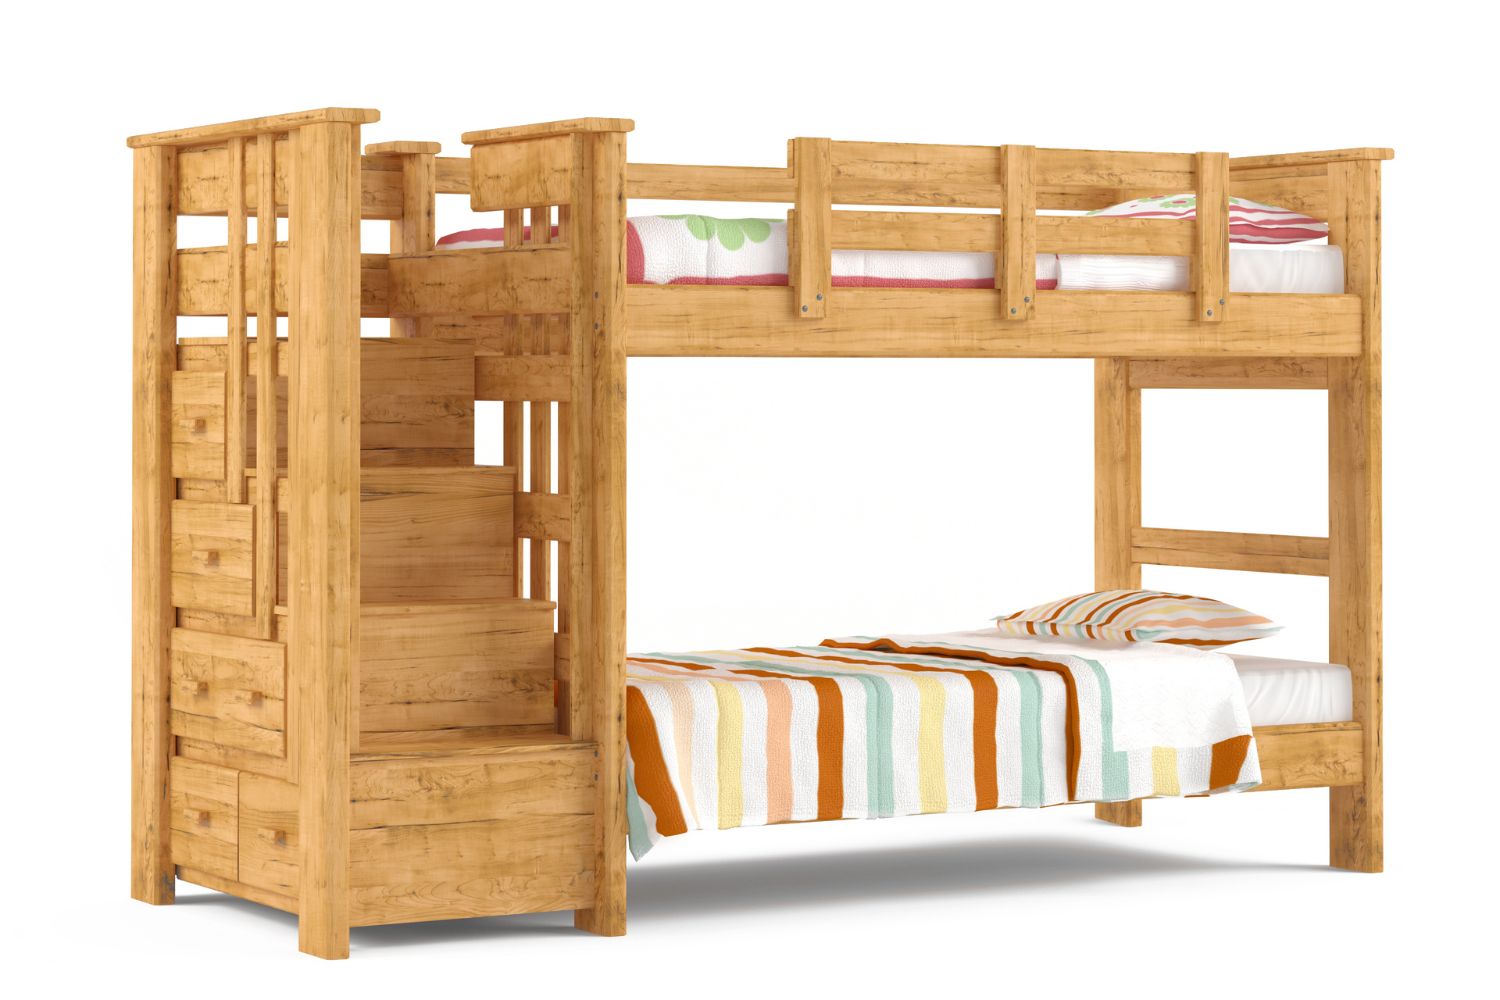 What to look for when searching for a top bunk bed for your home